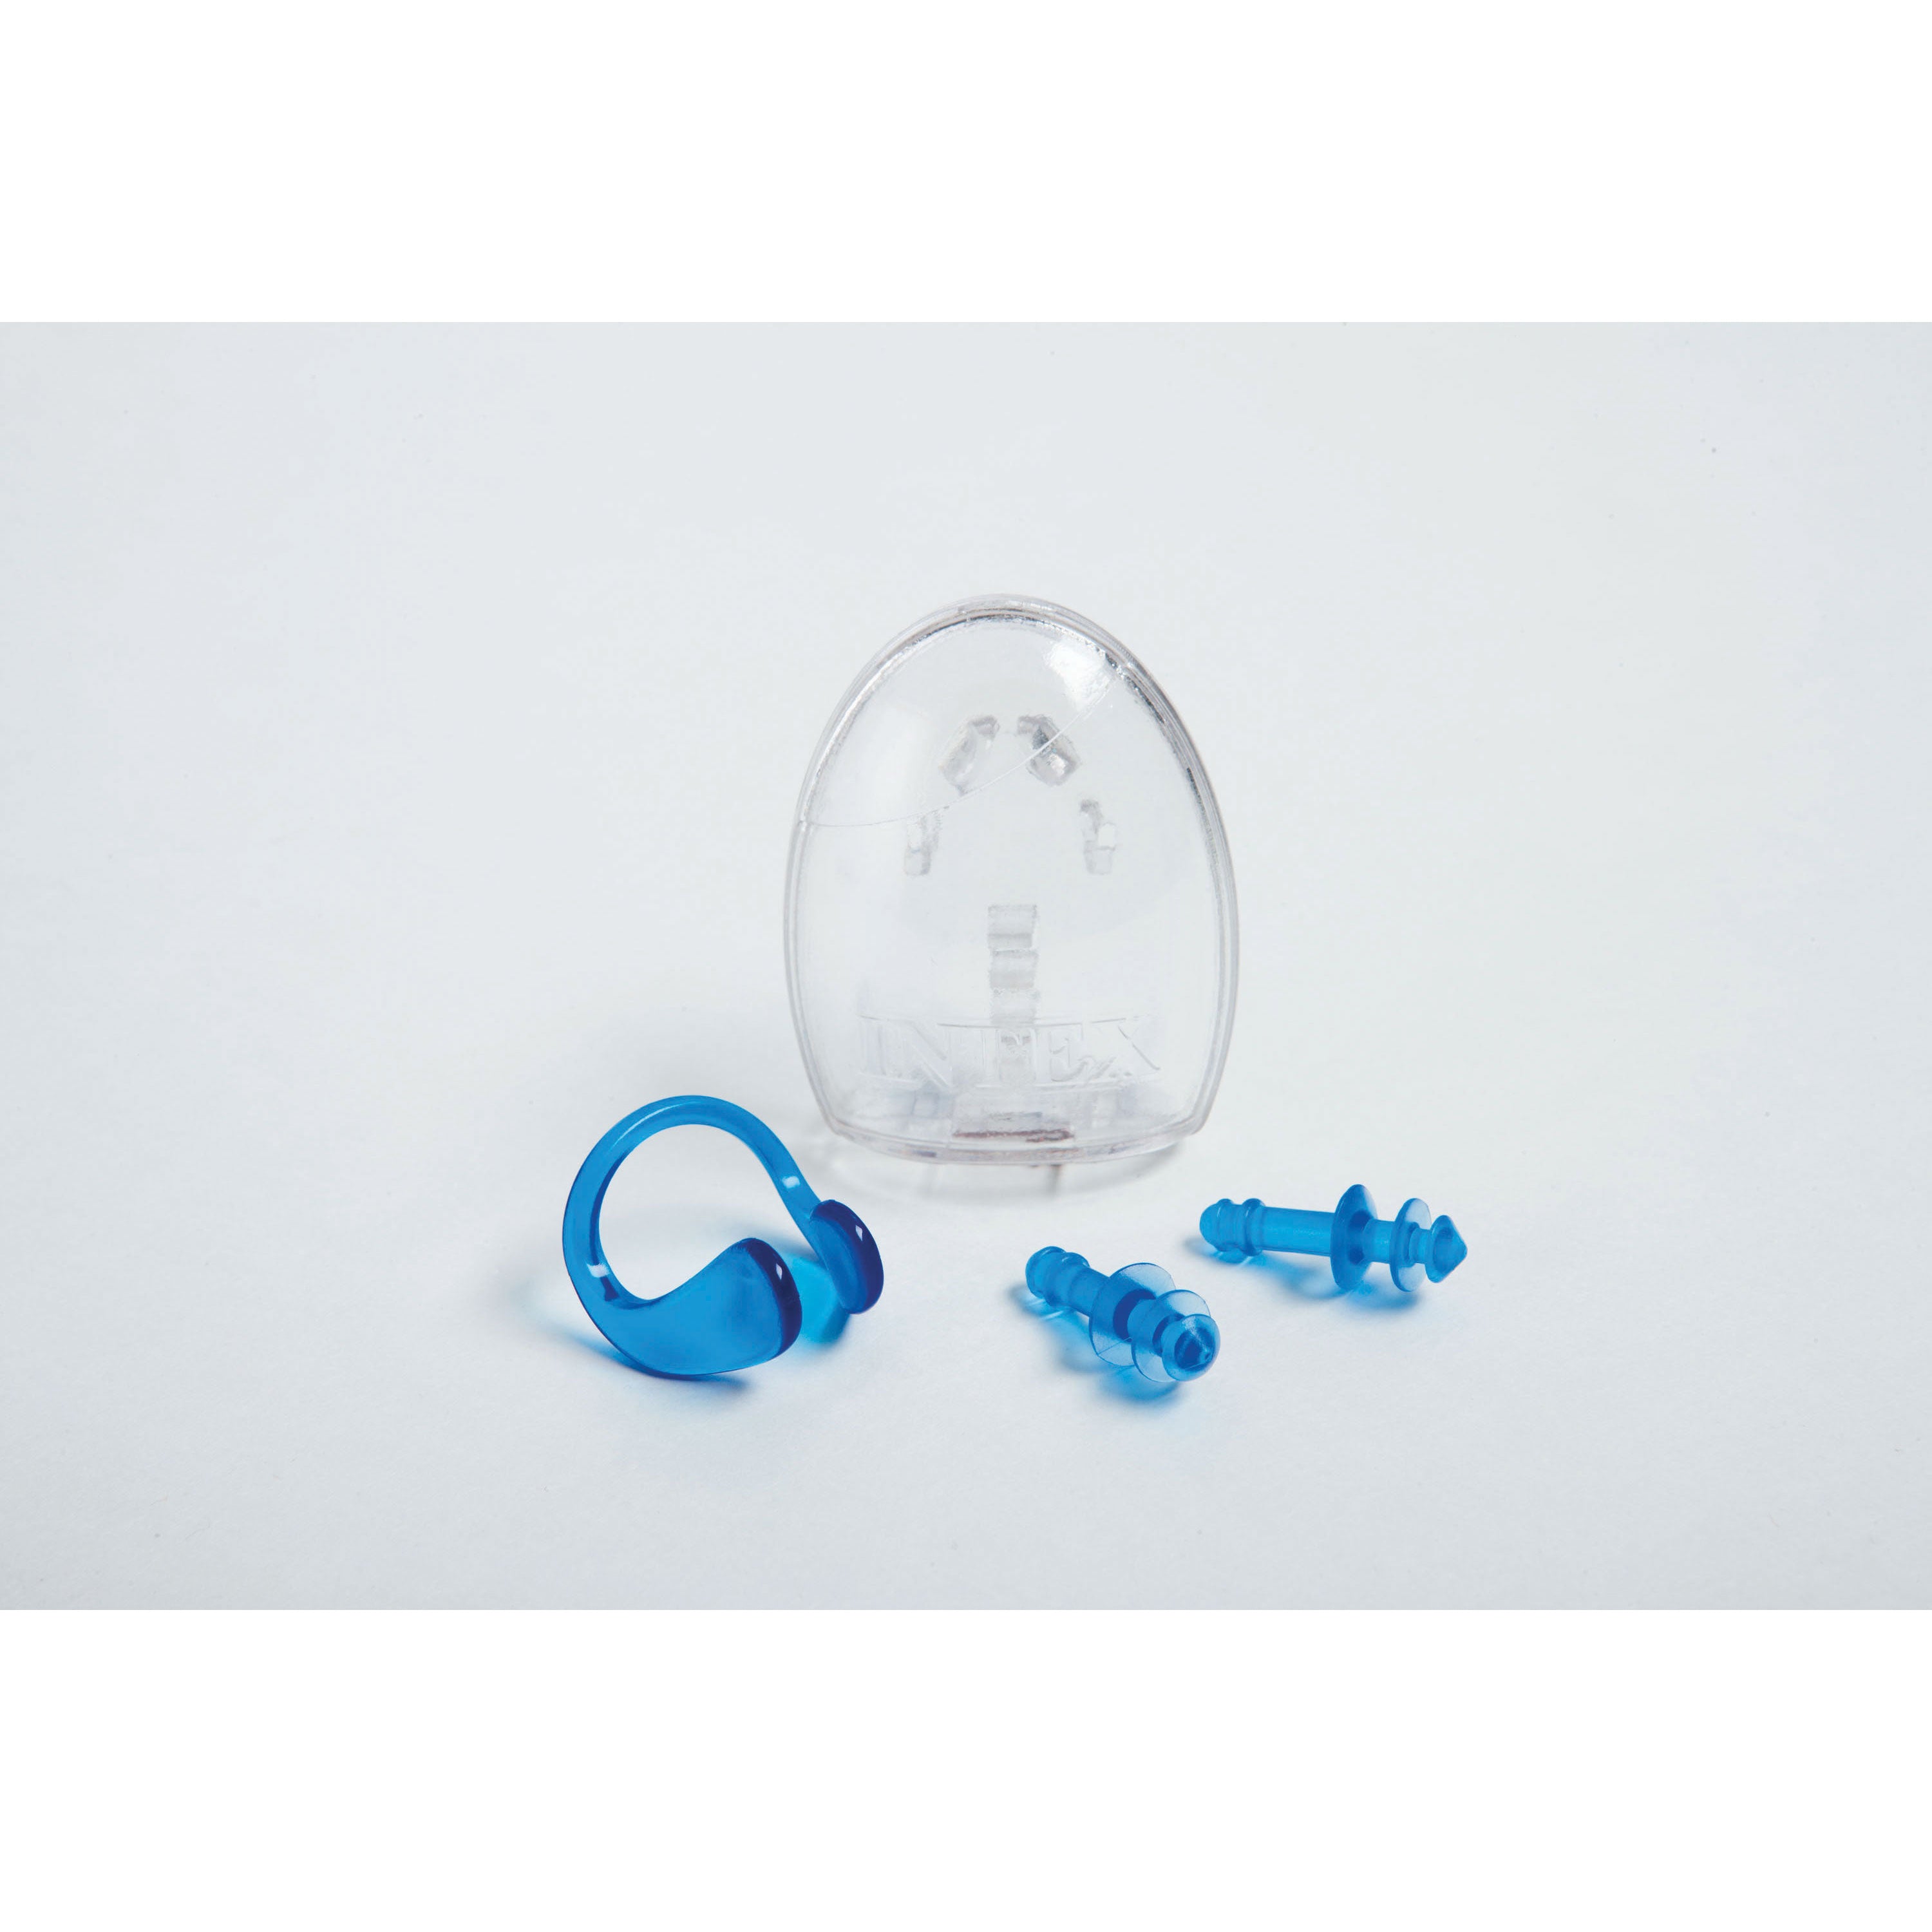 Intex 55609 Ear Plugs and Nose Clip Combo